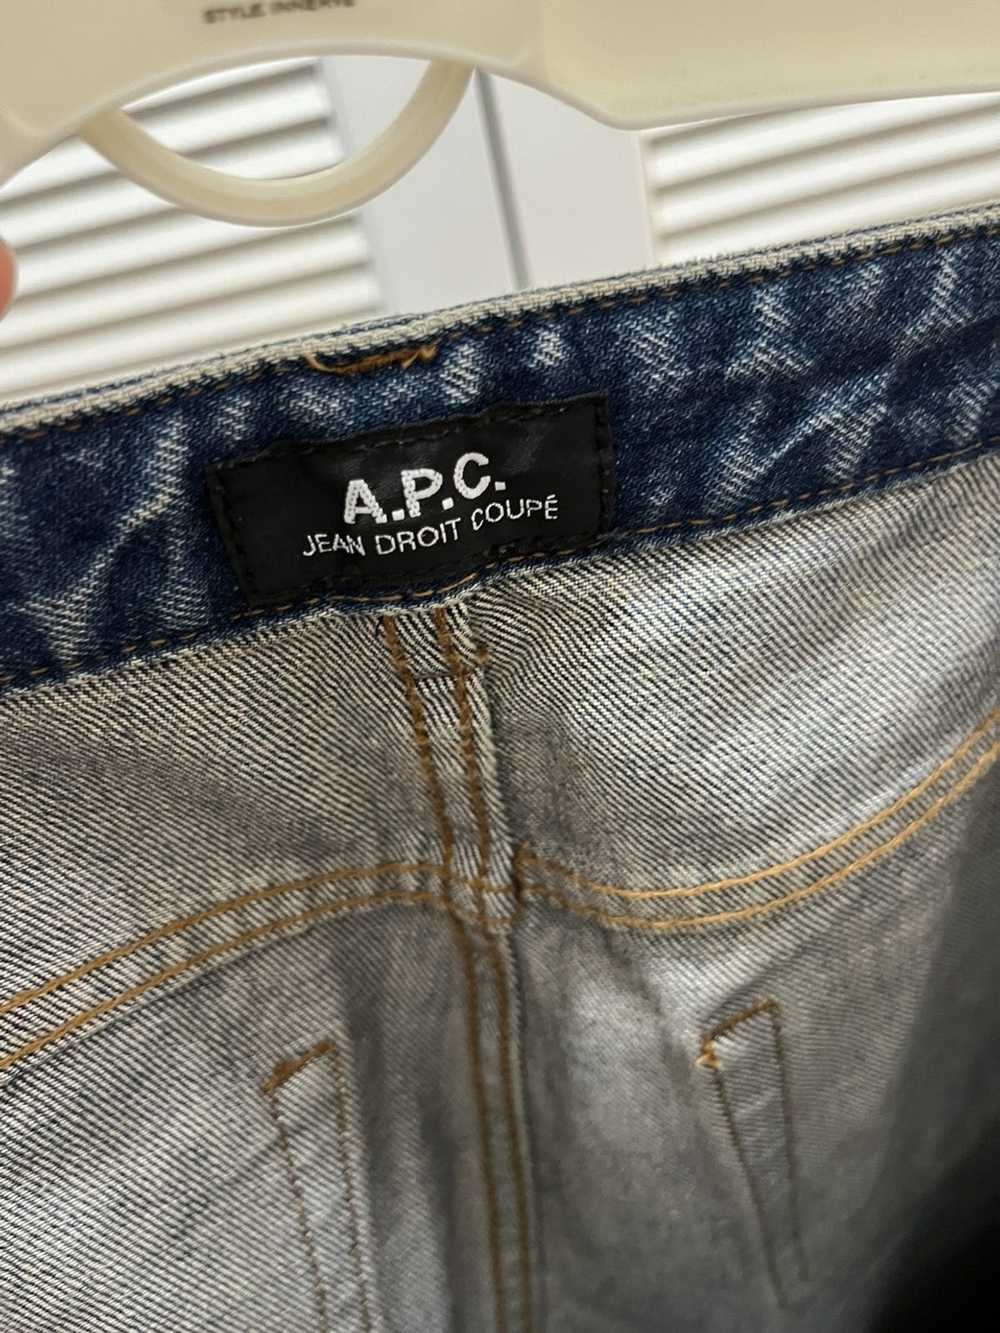 A.P.C. A.P.C. distressed cropped jeans - image 4